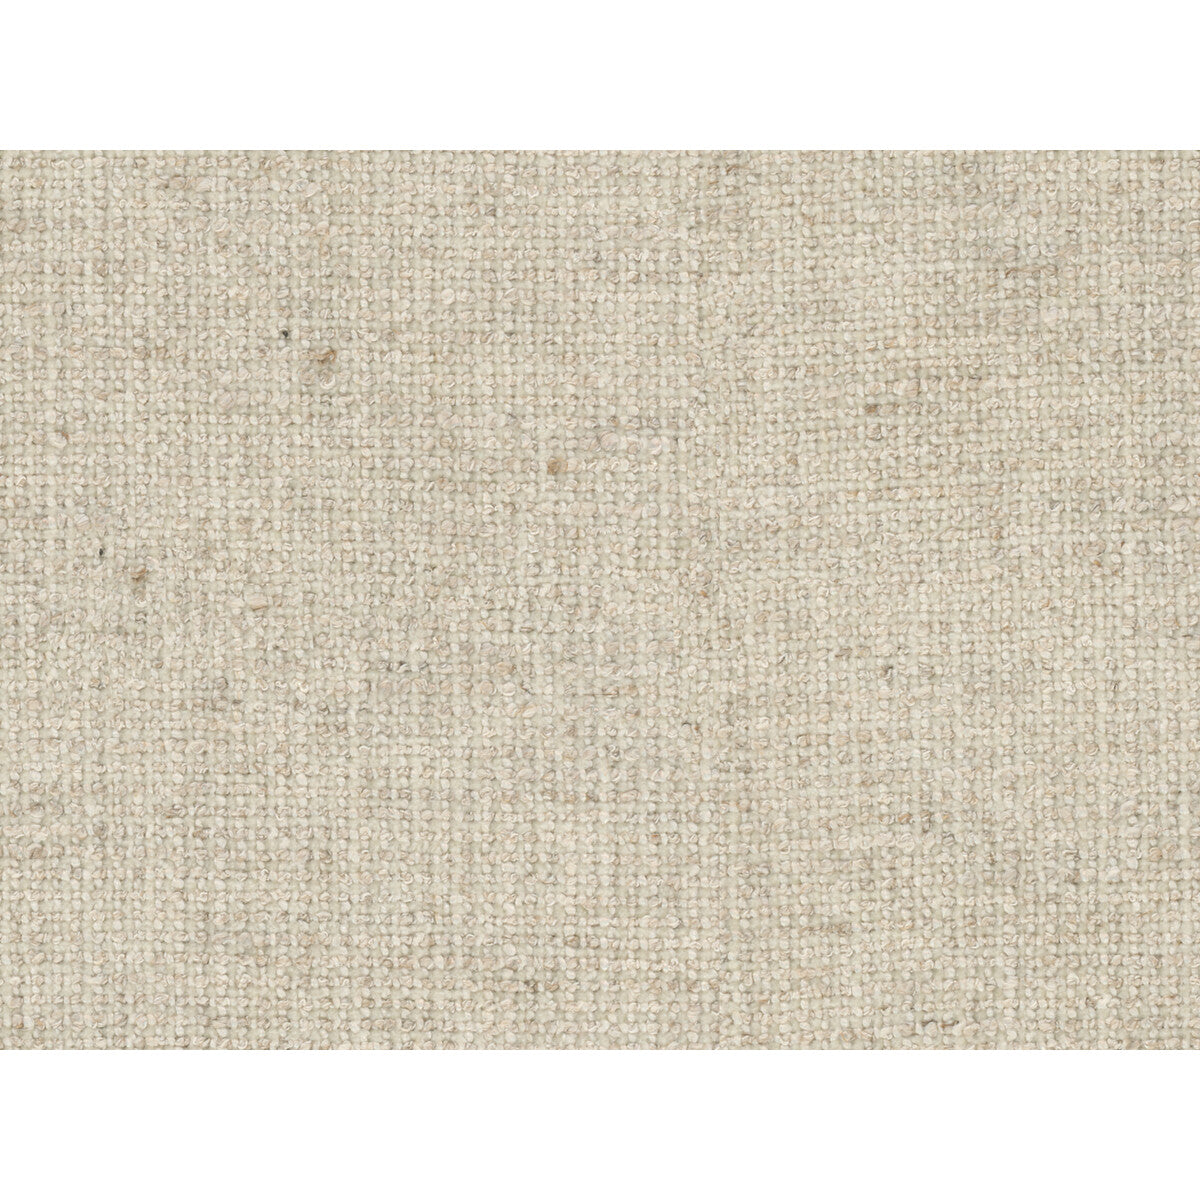 Skiffle fabric in cream color - pattern 34449.116.0 - by Kravet Couture